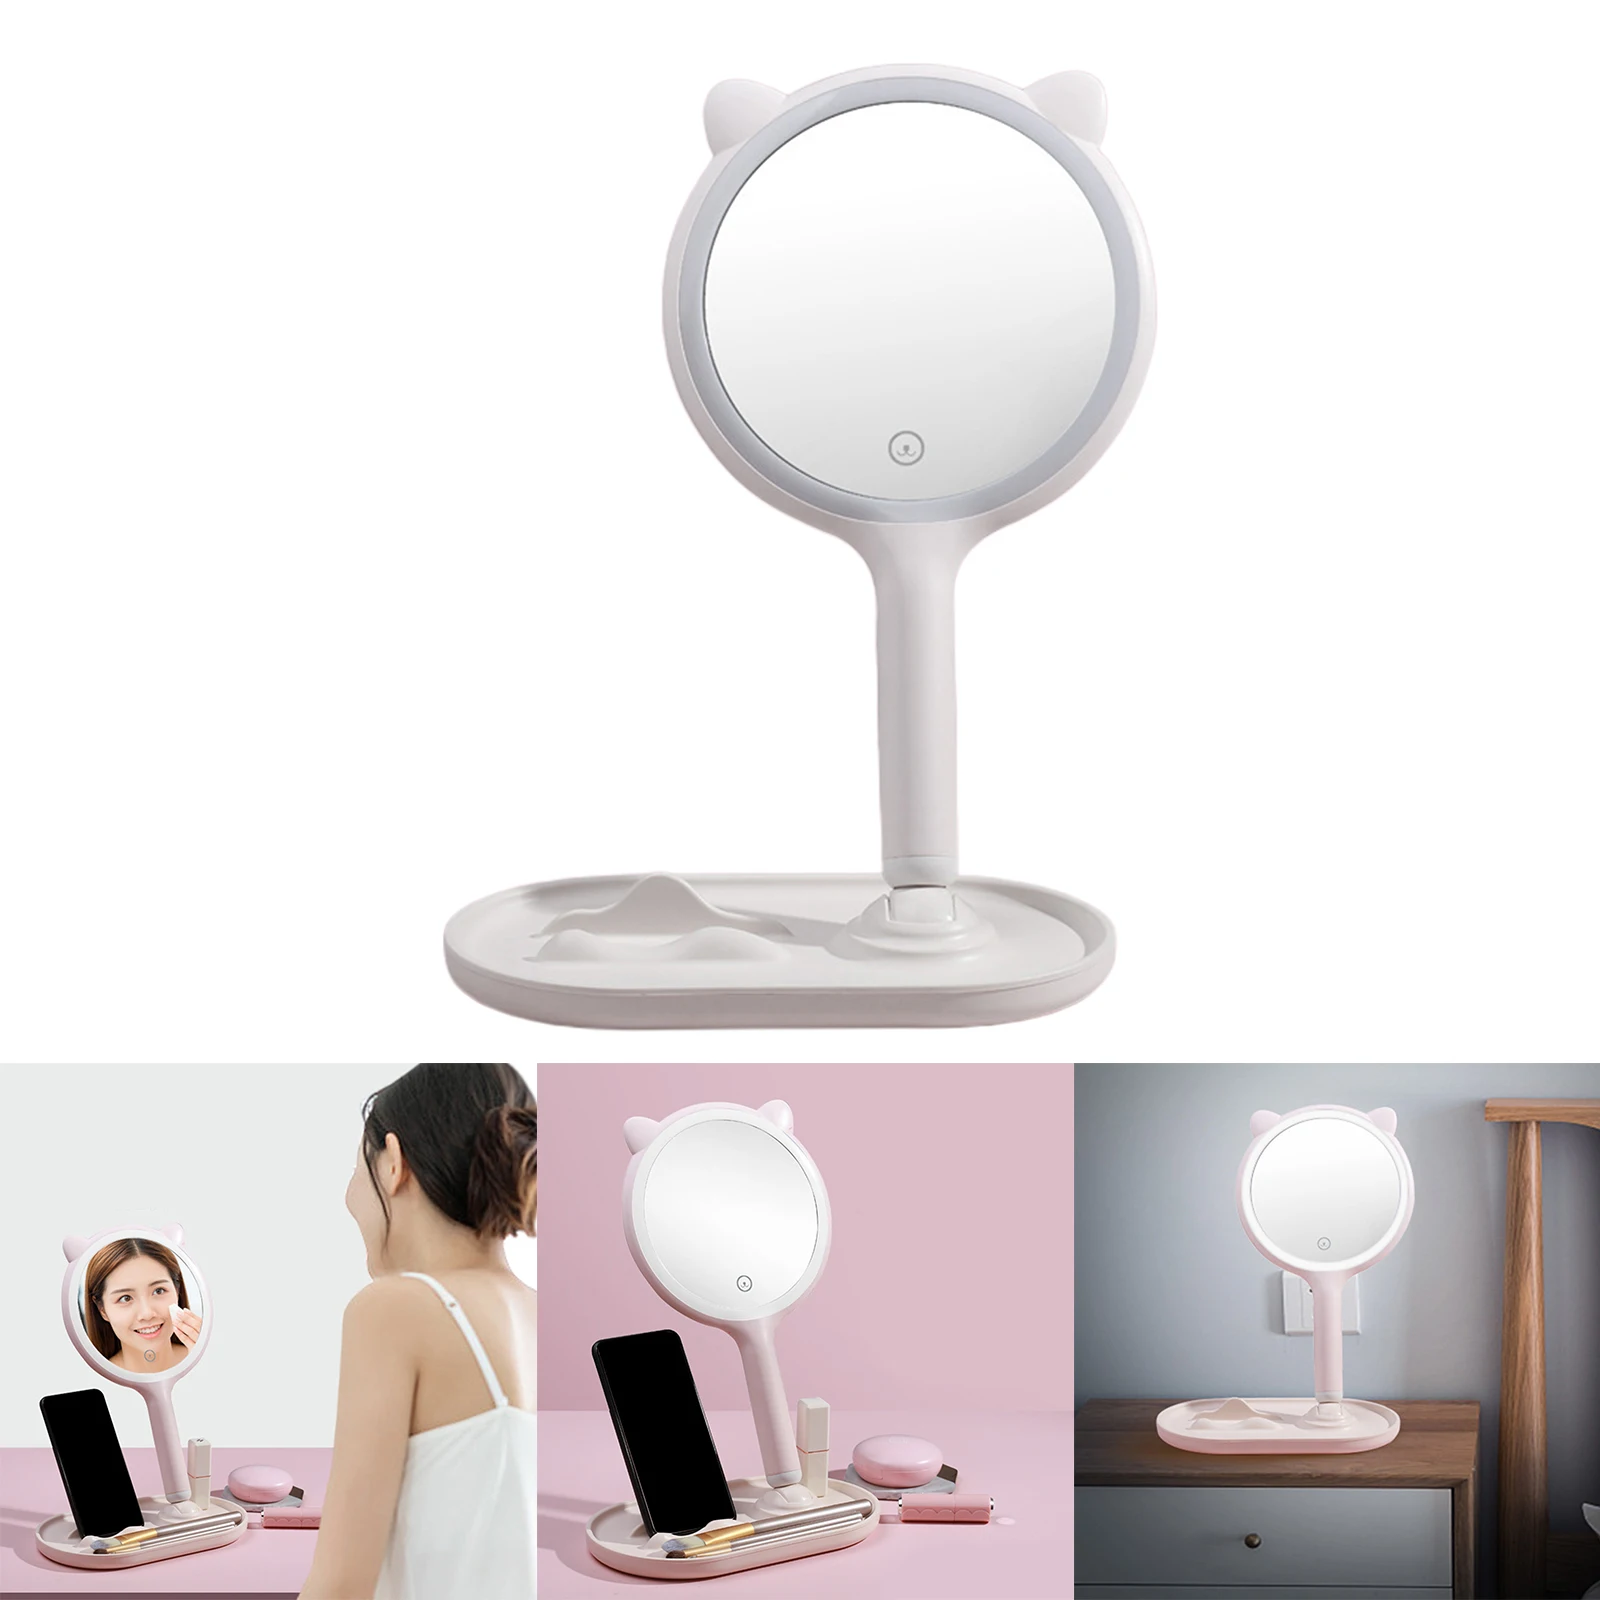 Cute LED Makeup Mirror Handheld Double-Side Dimmable Touch Sensor for Vanity